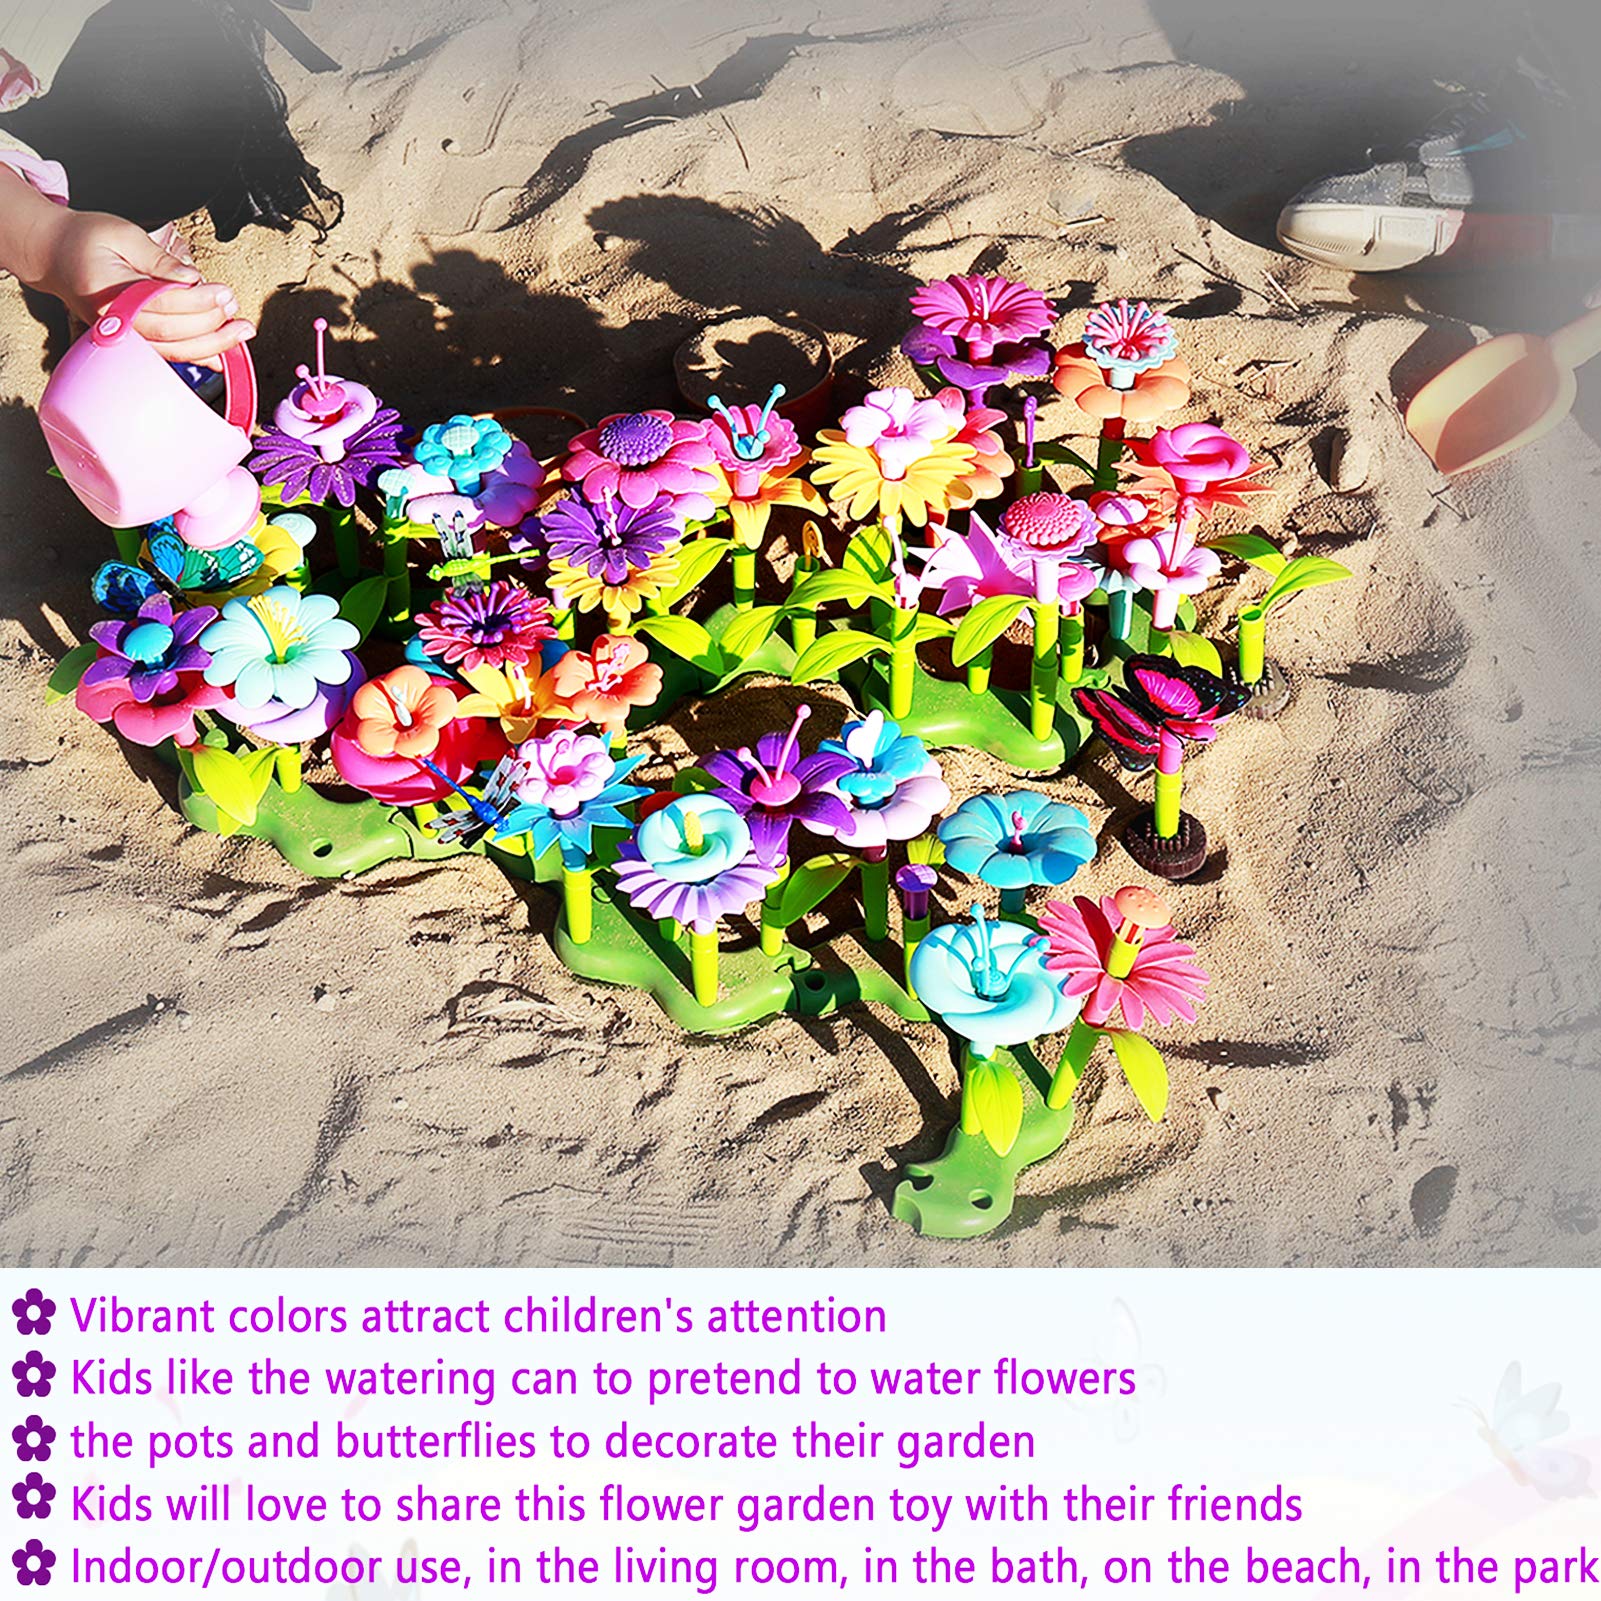 LANNEY Flower Garden Building Toys, 200 Pcs Flower Building Toy Set for 3 to 7 Year Old Boy Girl Gifts, Build a Flower Garden Educational Stem Toddler Toys for Birthday